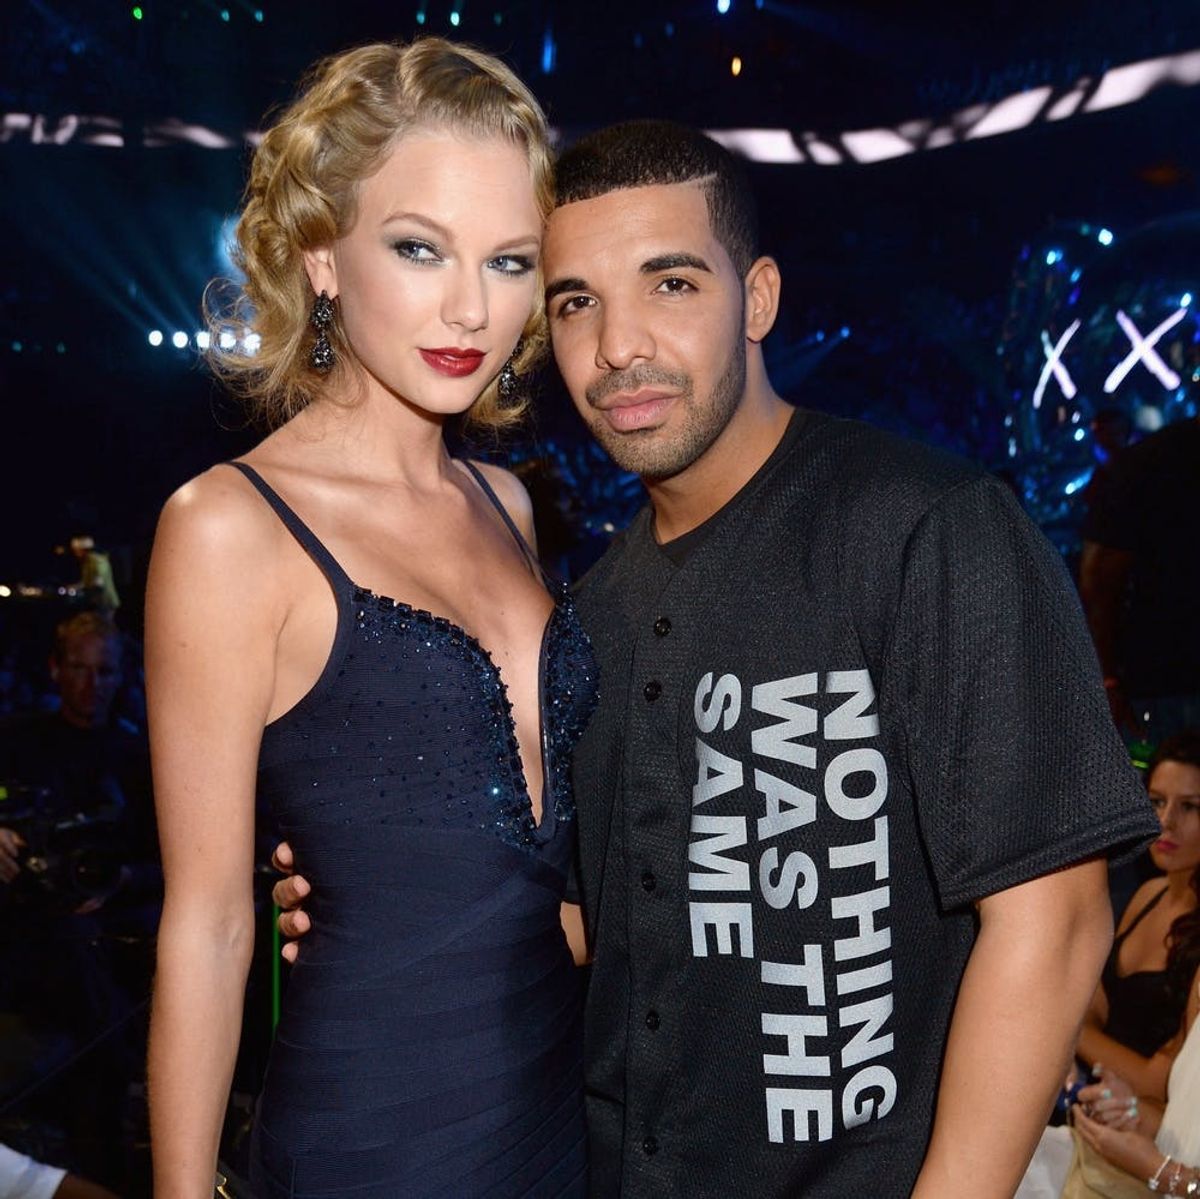 Drake Posted a Pic of Himself and Taylor Swift and Now We Know Why They’re Together